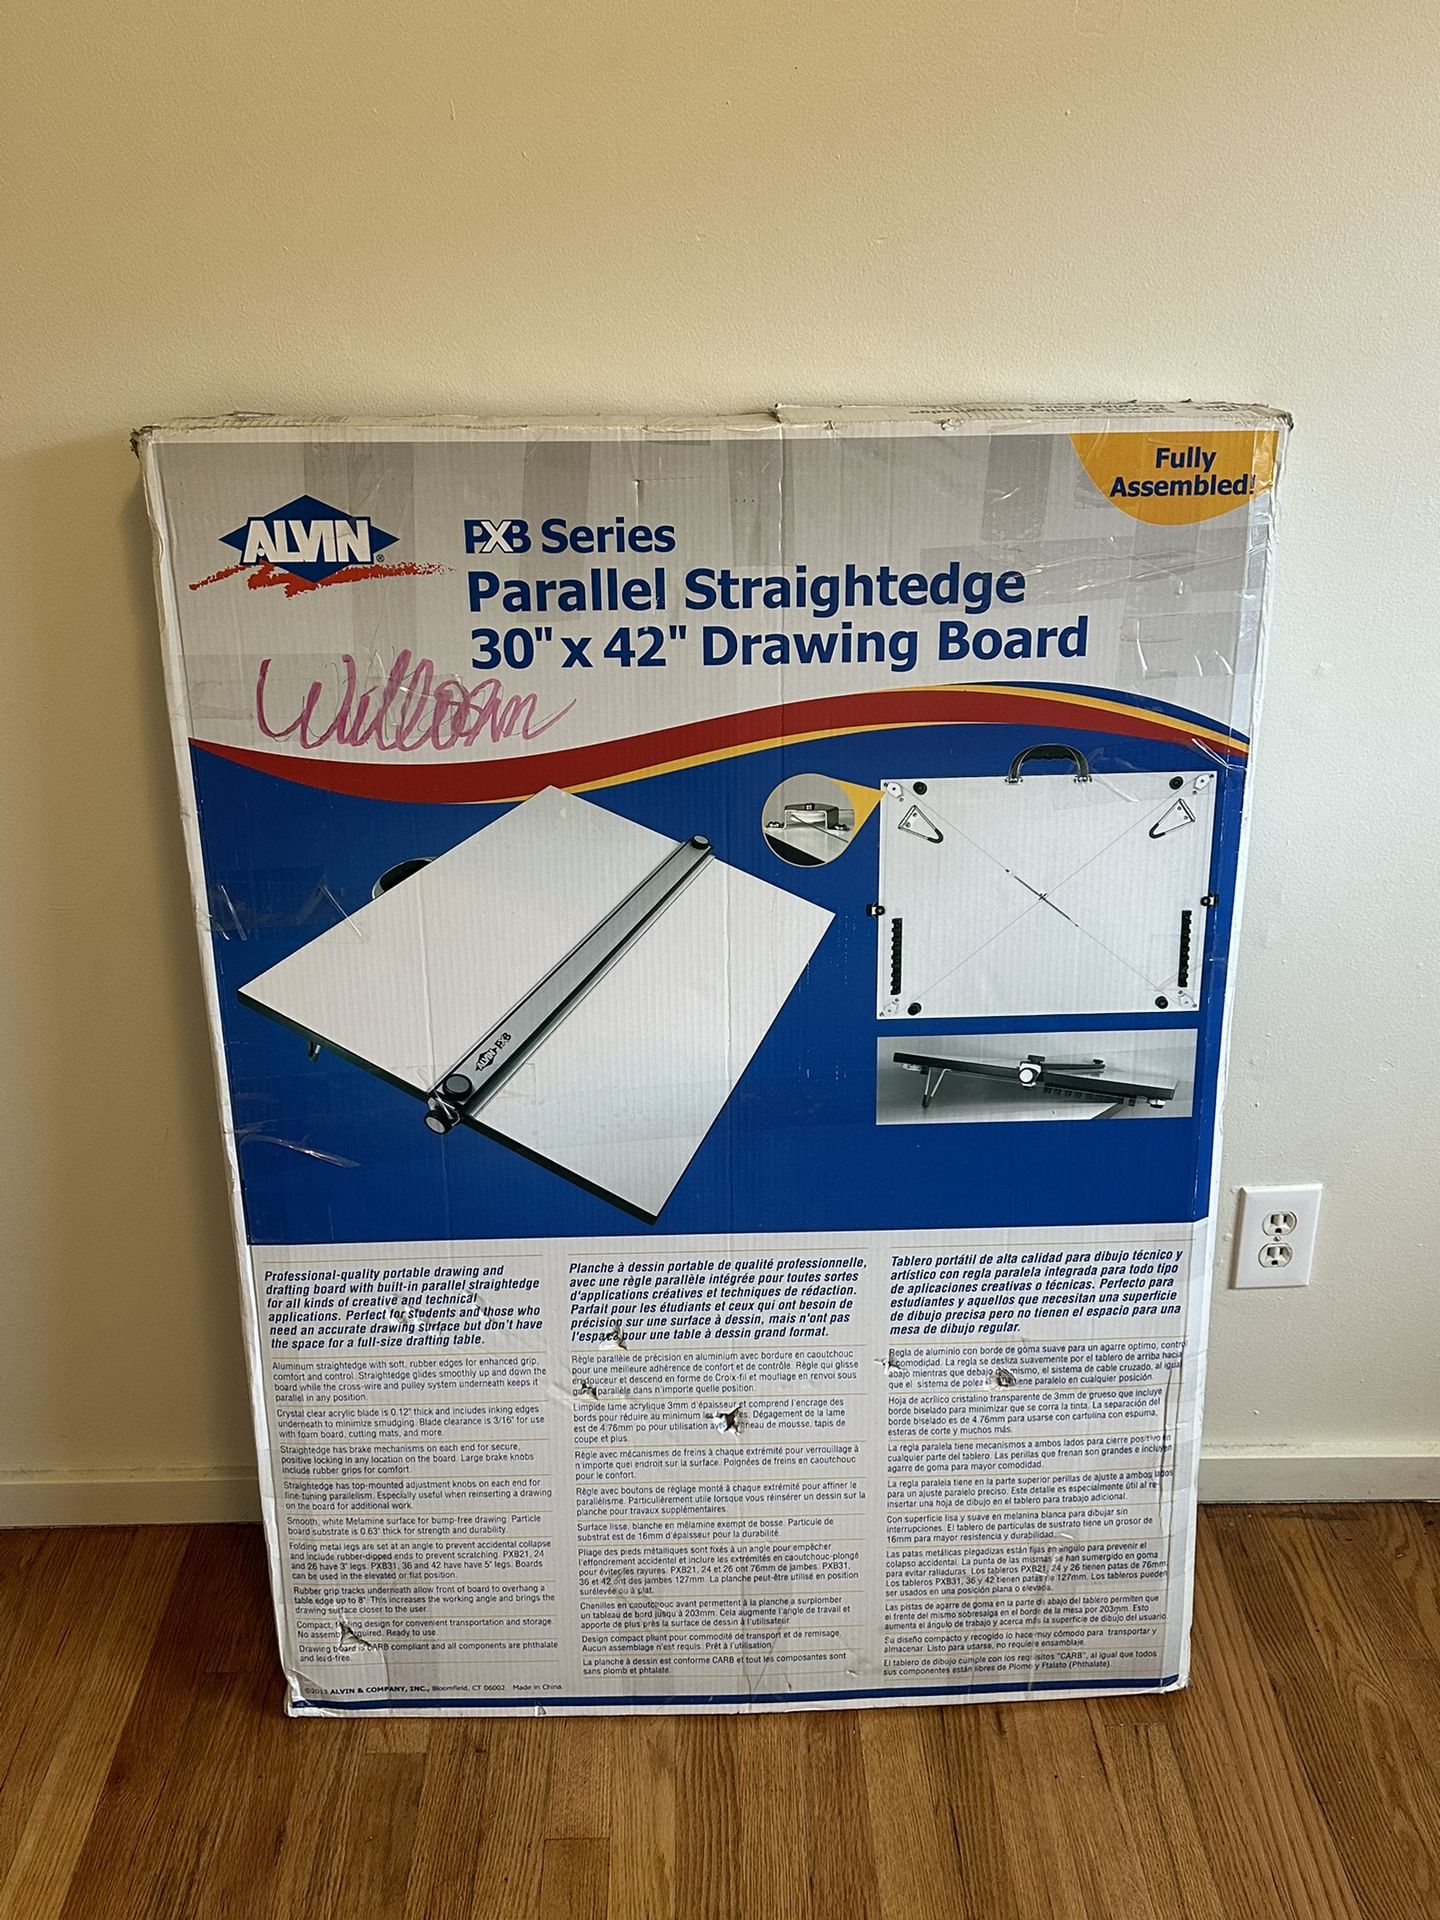 Alvin PXB Series Parallel Straightedge 30”x42” Drawing Board.